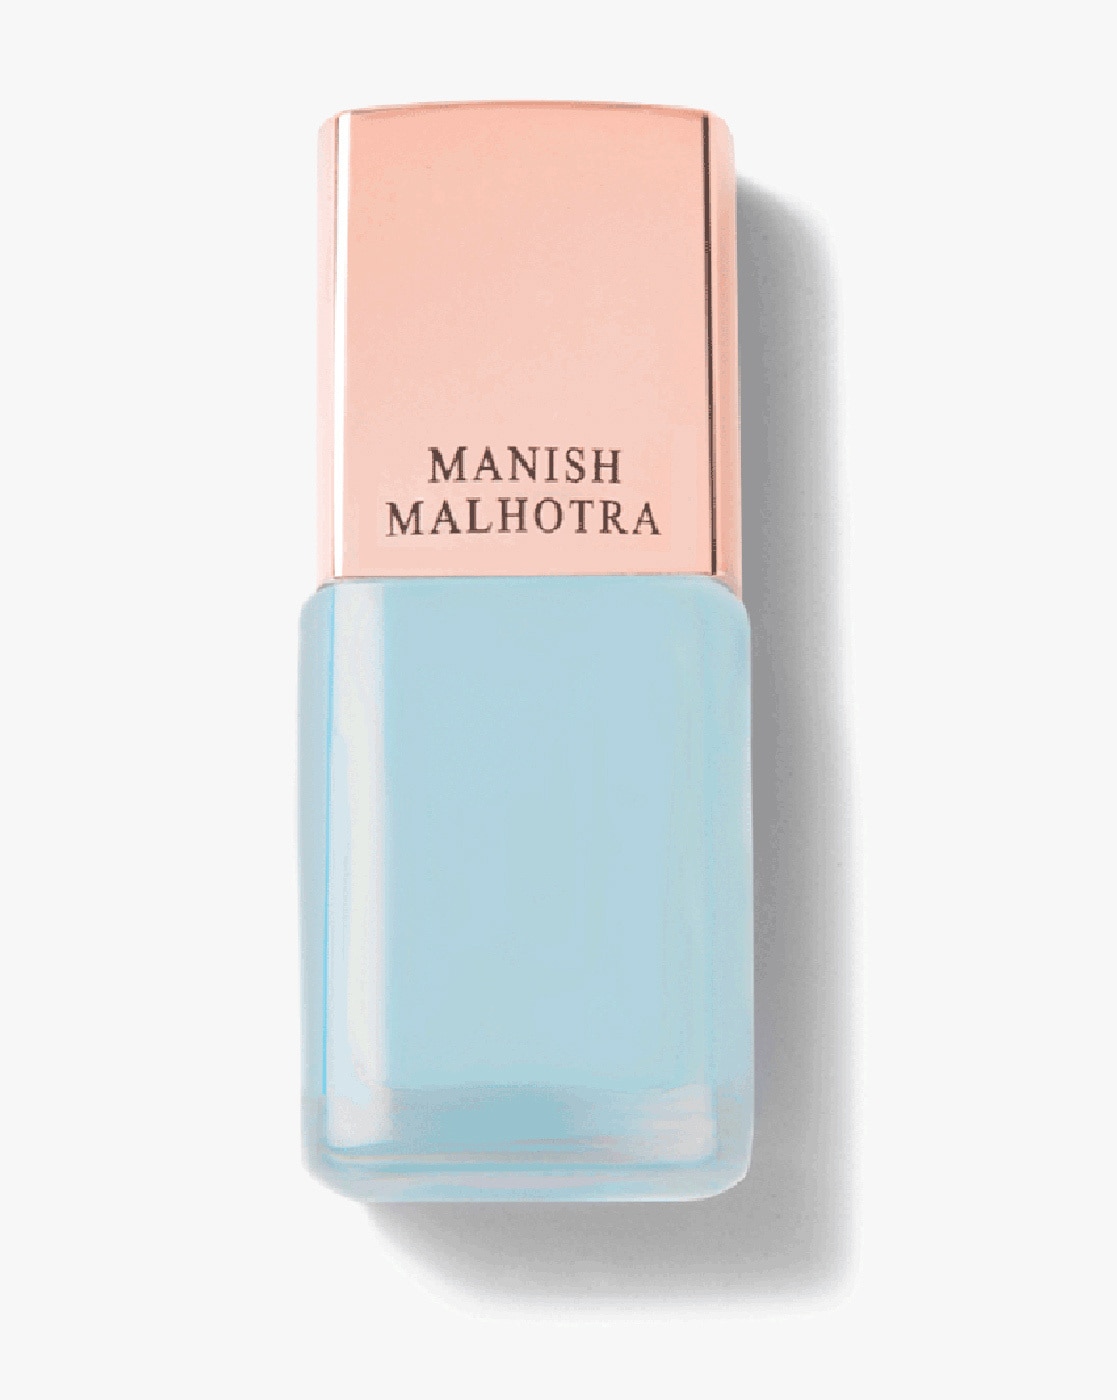 Sky Blue Series 8ml Manish Malhotra Nail Polish With UV Gel, Glue, And  Lacquer For Long Lasting Manicure And Varnish 231020 From Jia0007, $20.61 |  DHgate.Com